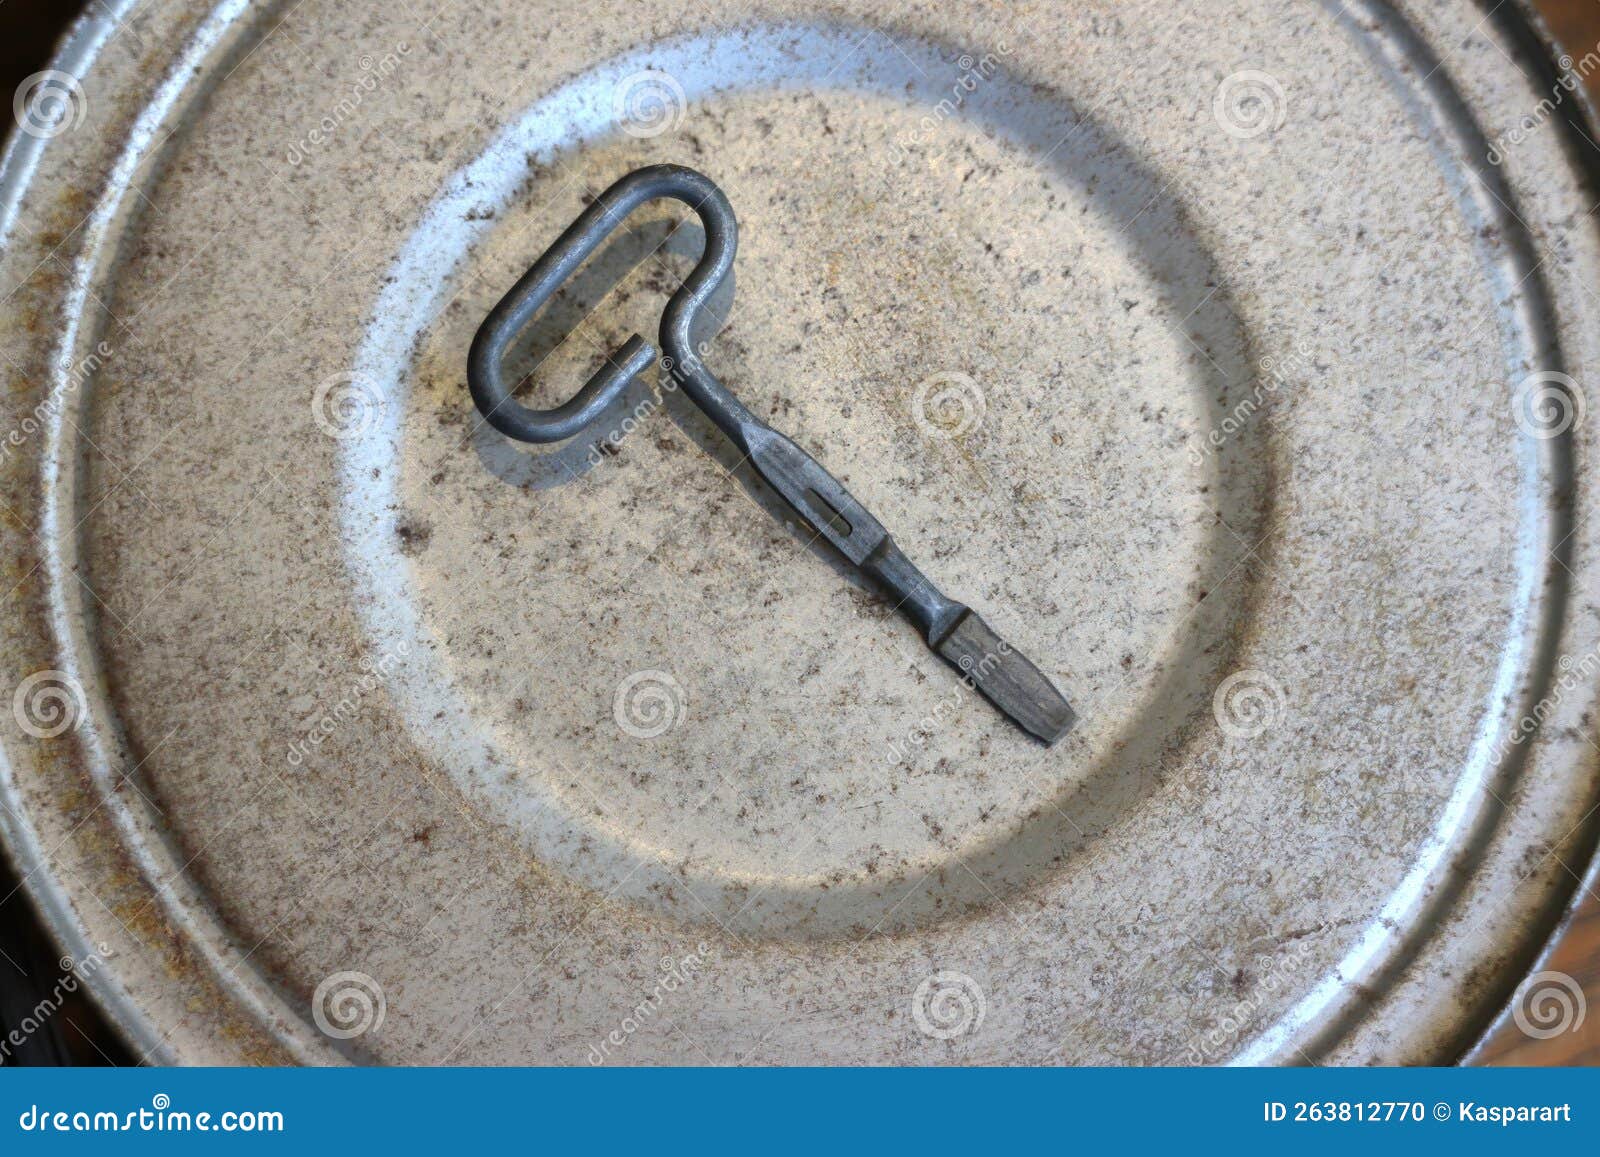 https://thumbs.dreamstime.com/z/cover-old-rusty-tin-can-opener-top-cover-old-rusty-tin-can-opener-top-263812770.jpg